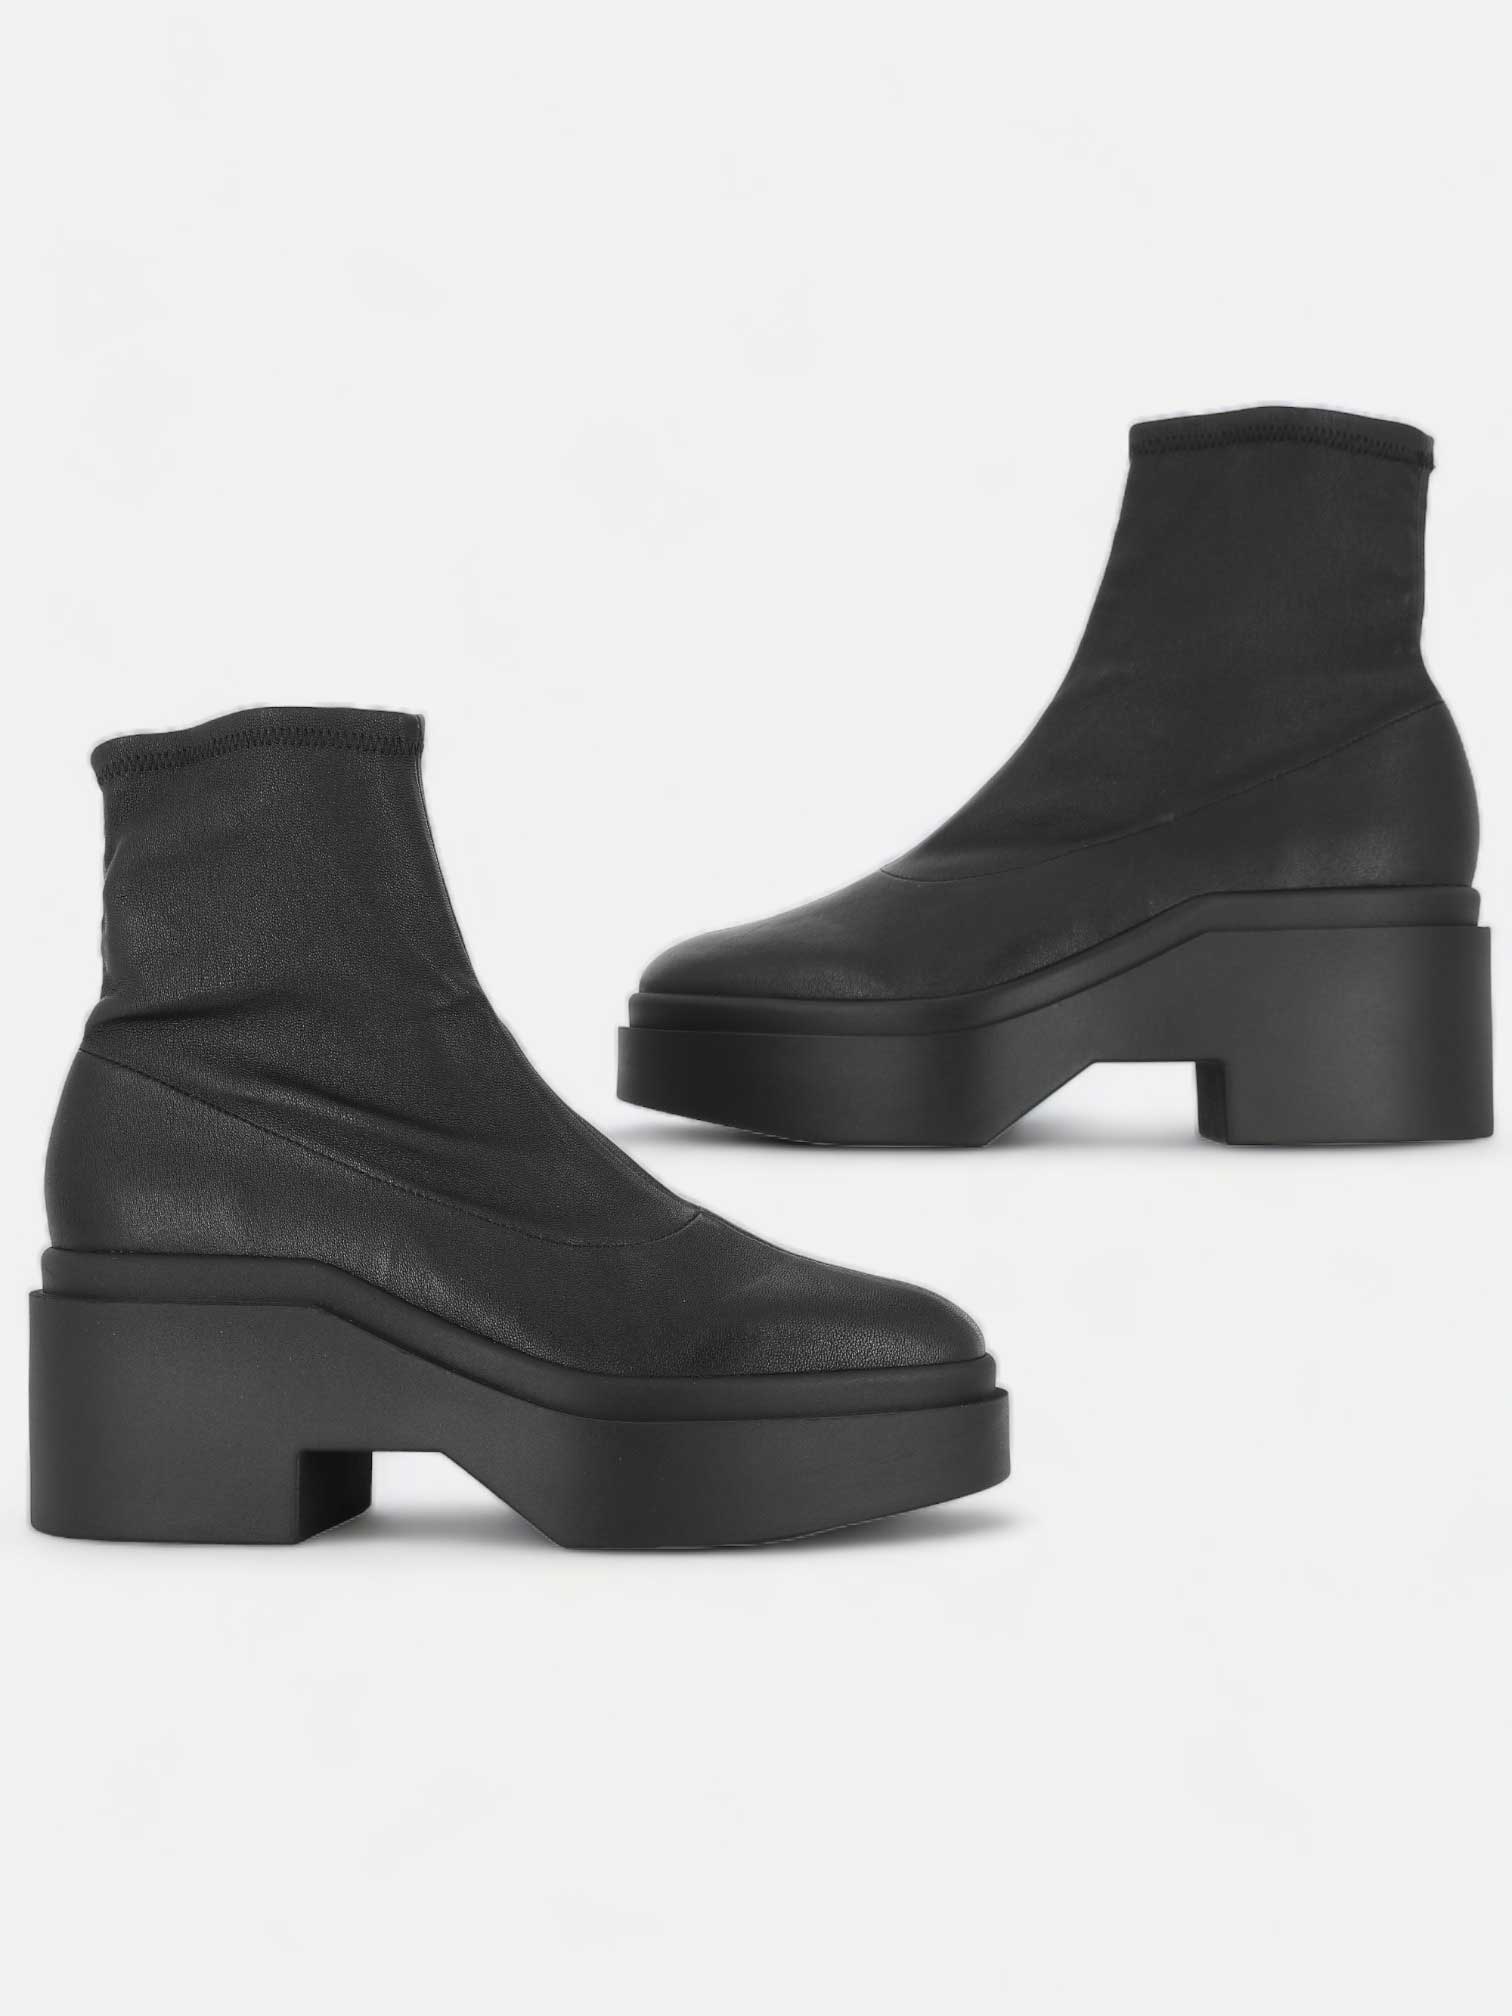 ANKLE BOOTS - NELLE ankle boots, stretch lambskin black - 3606063811415 - Clergerie Paris - Europe